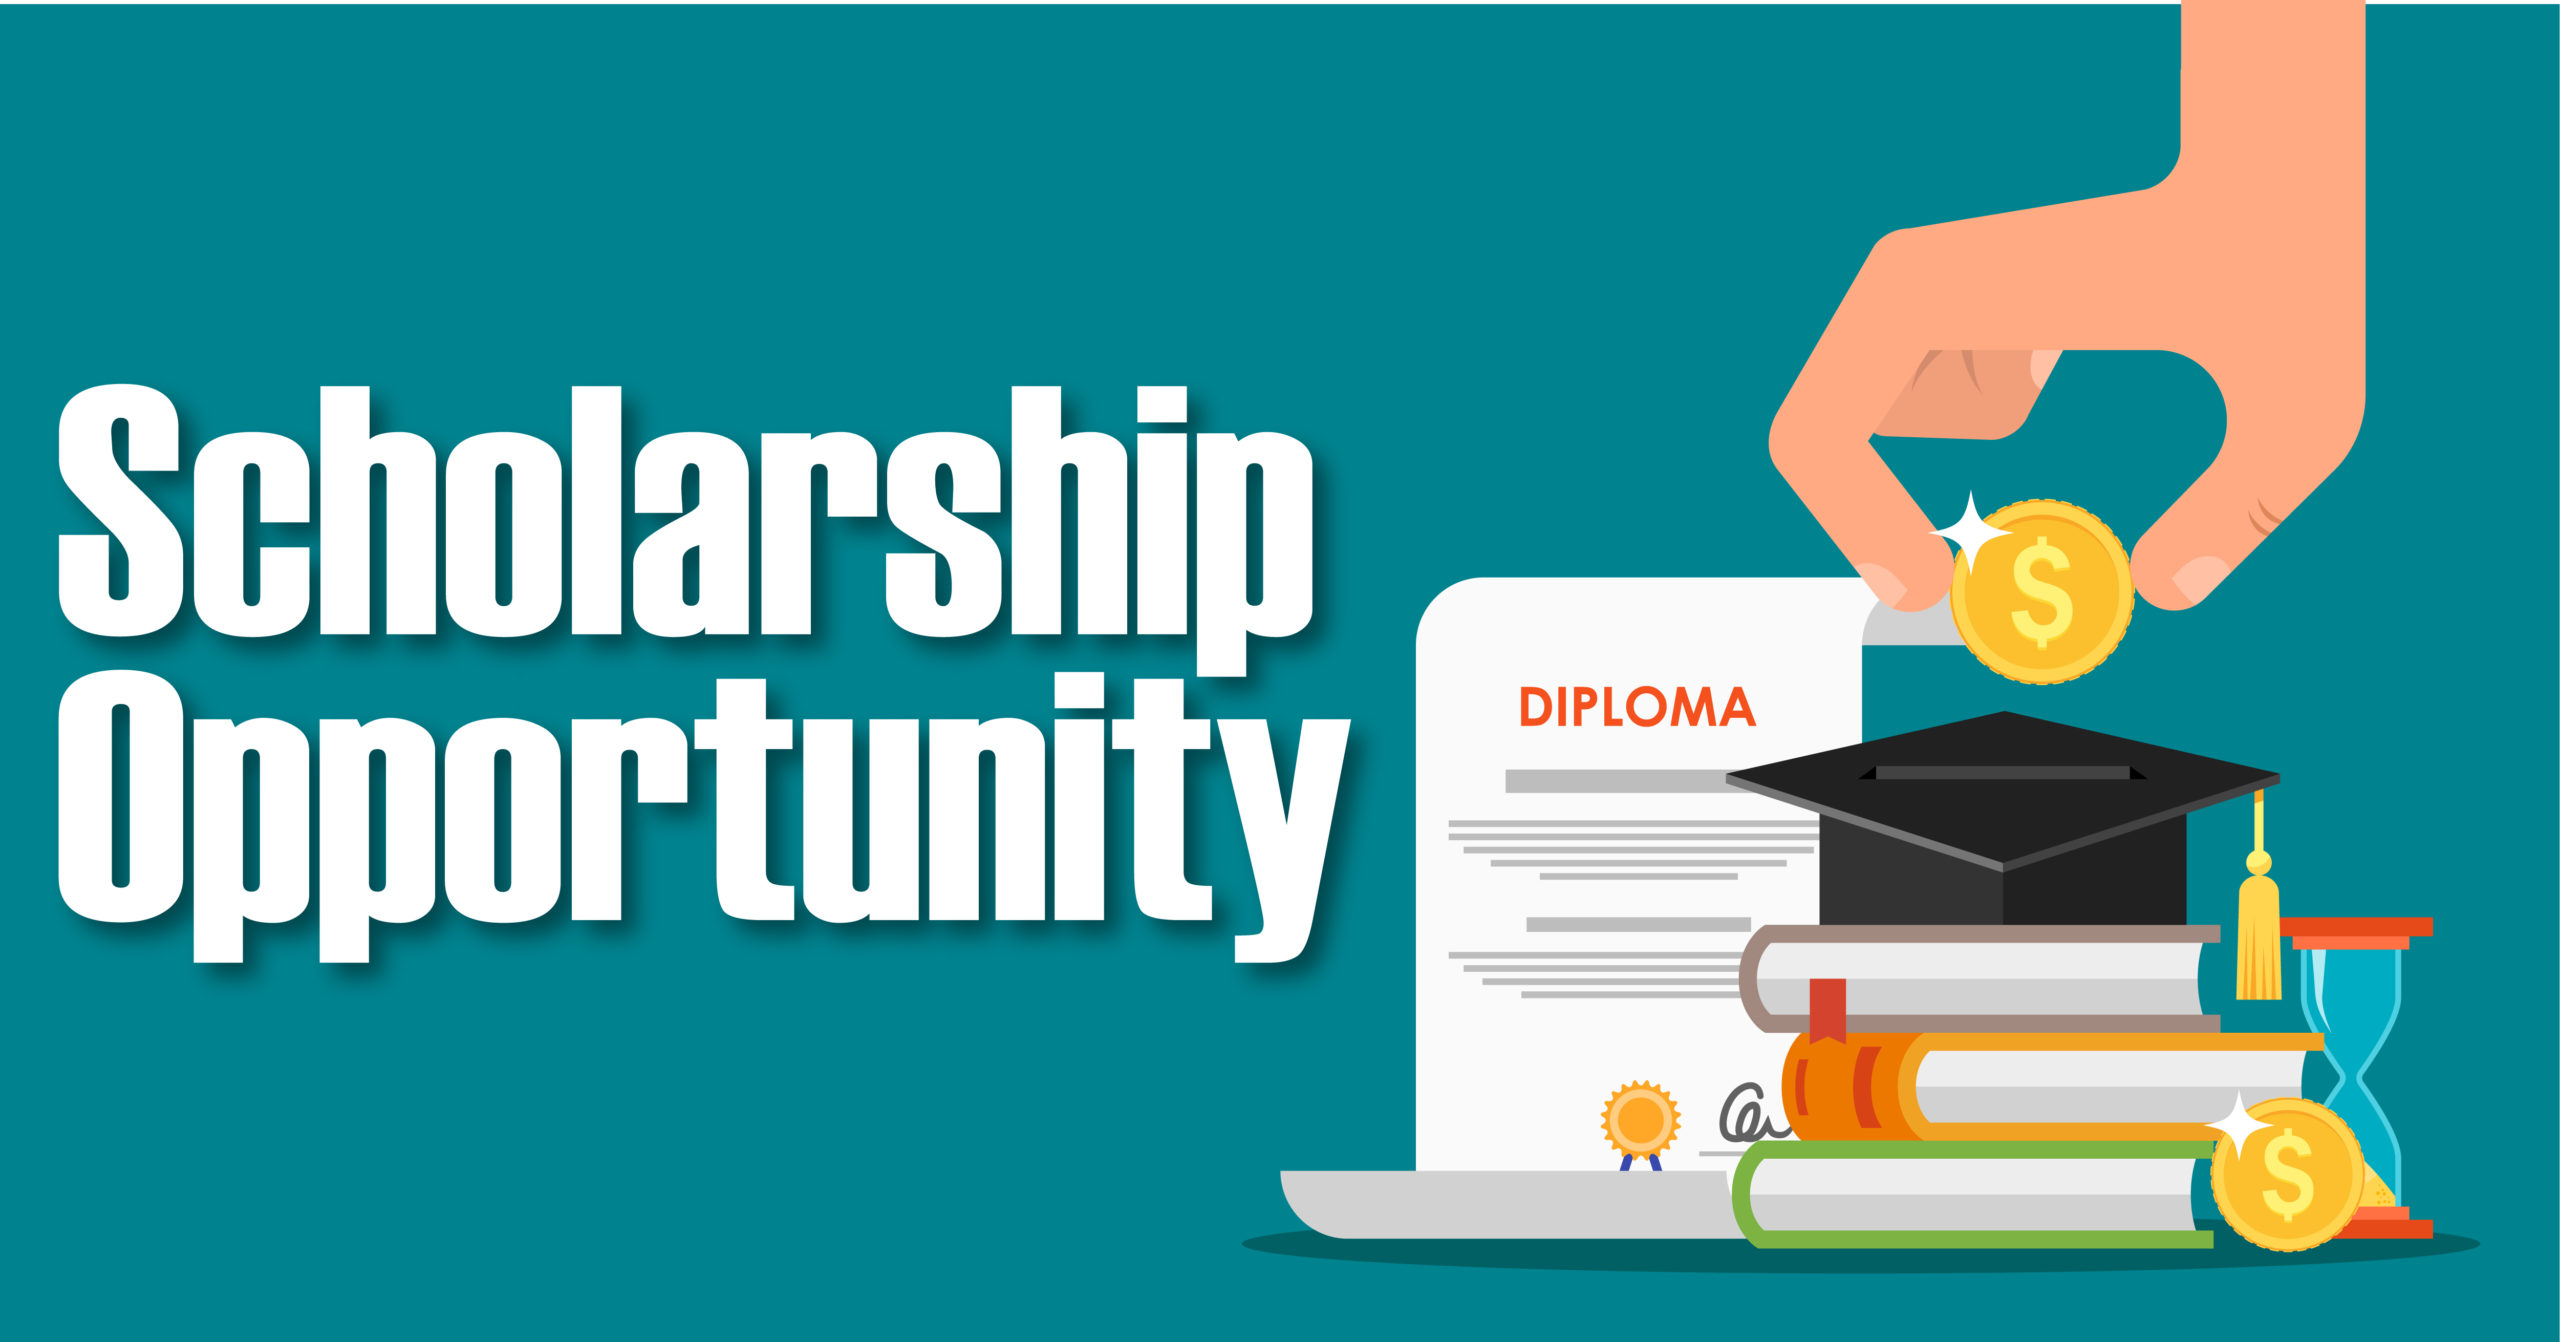 Top 11 Scholarship Opportunities in the US for International Students